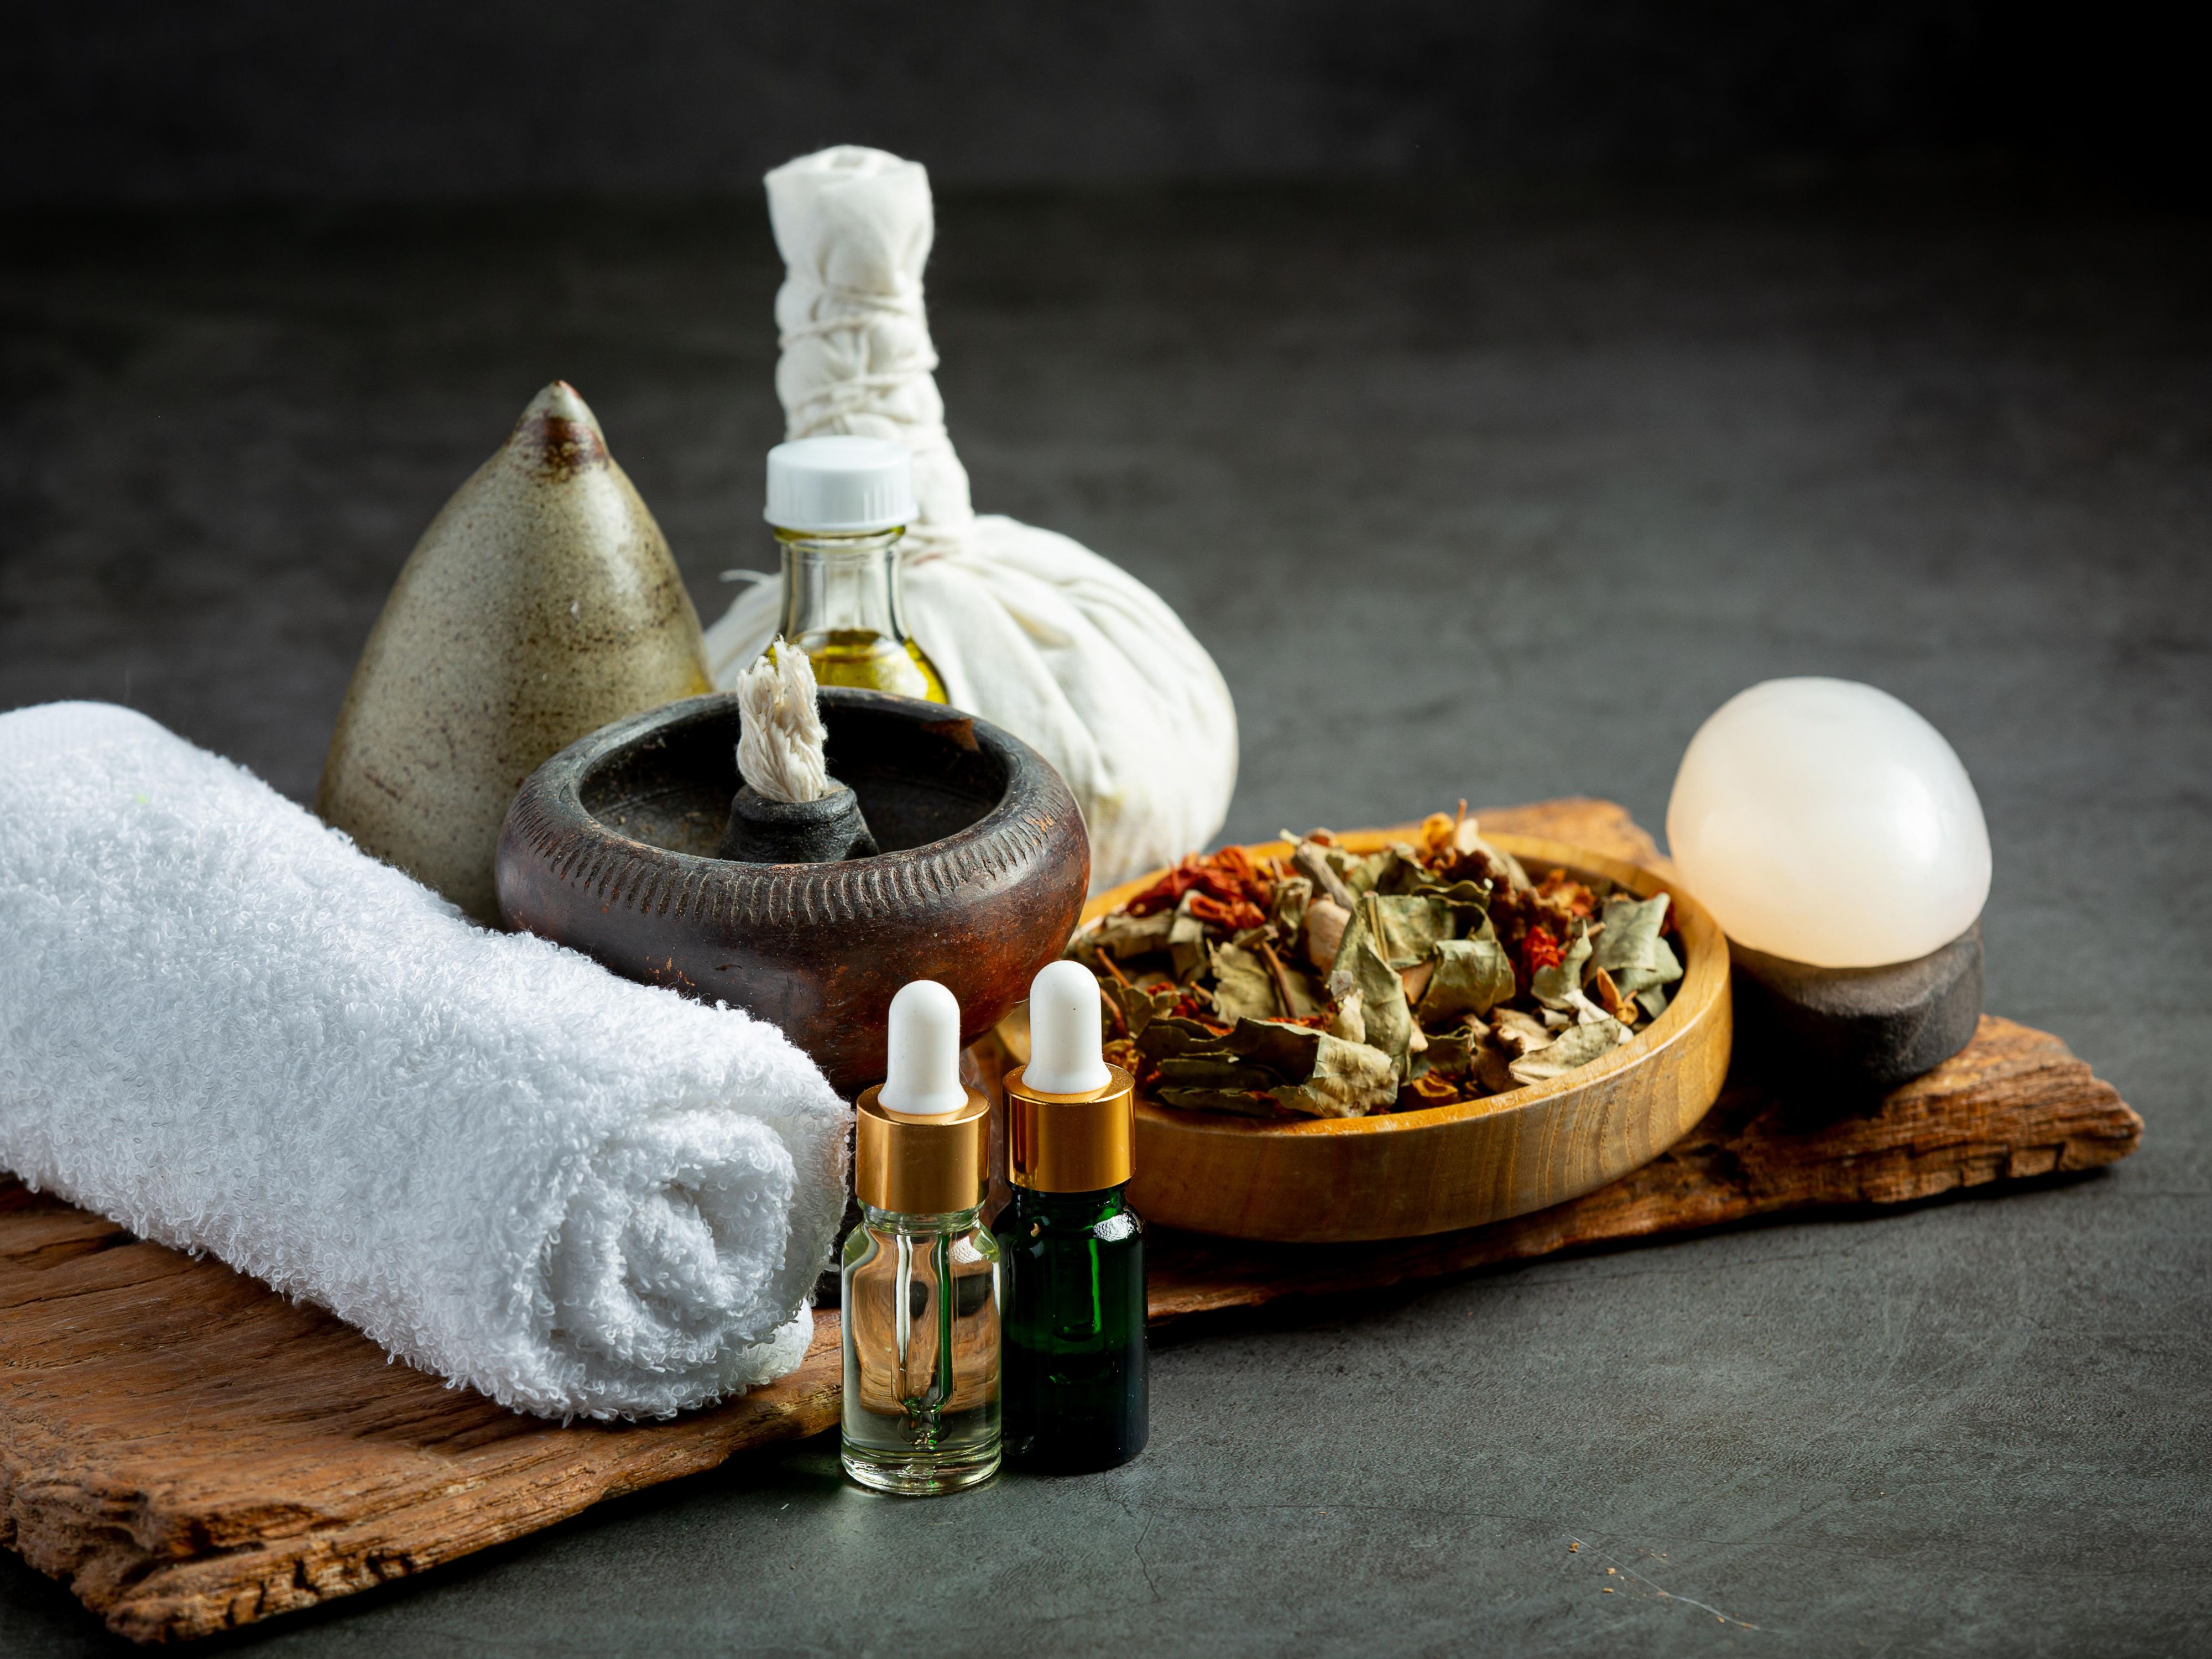 Spa & Salon is based on the notion of the Five Senses: Sight, Hearing, Touch, Smell, and Taste, which helps clients recall their inner serenity. Aromatic fragrances and an intimate ambiance greet you as you enter Spa & Salon, which provides modern exposure in terms of service, style, and well-being. 